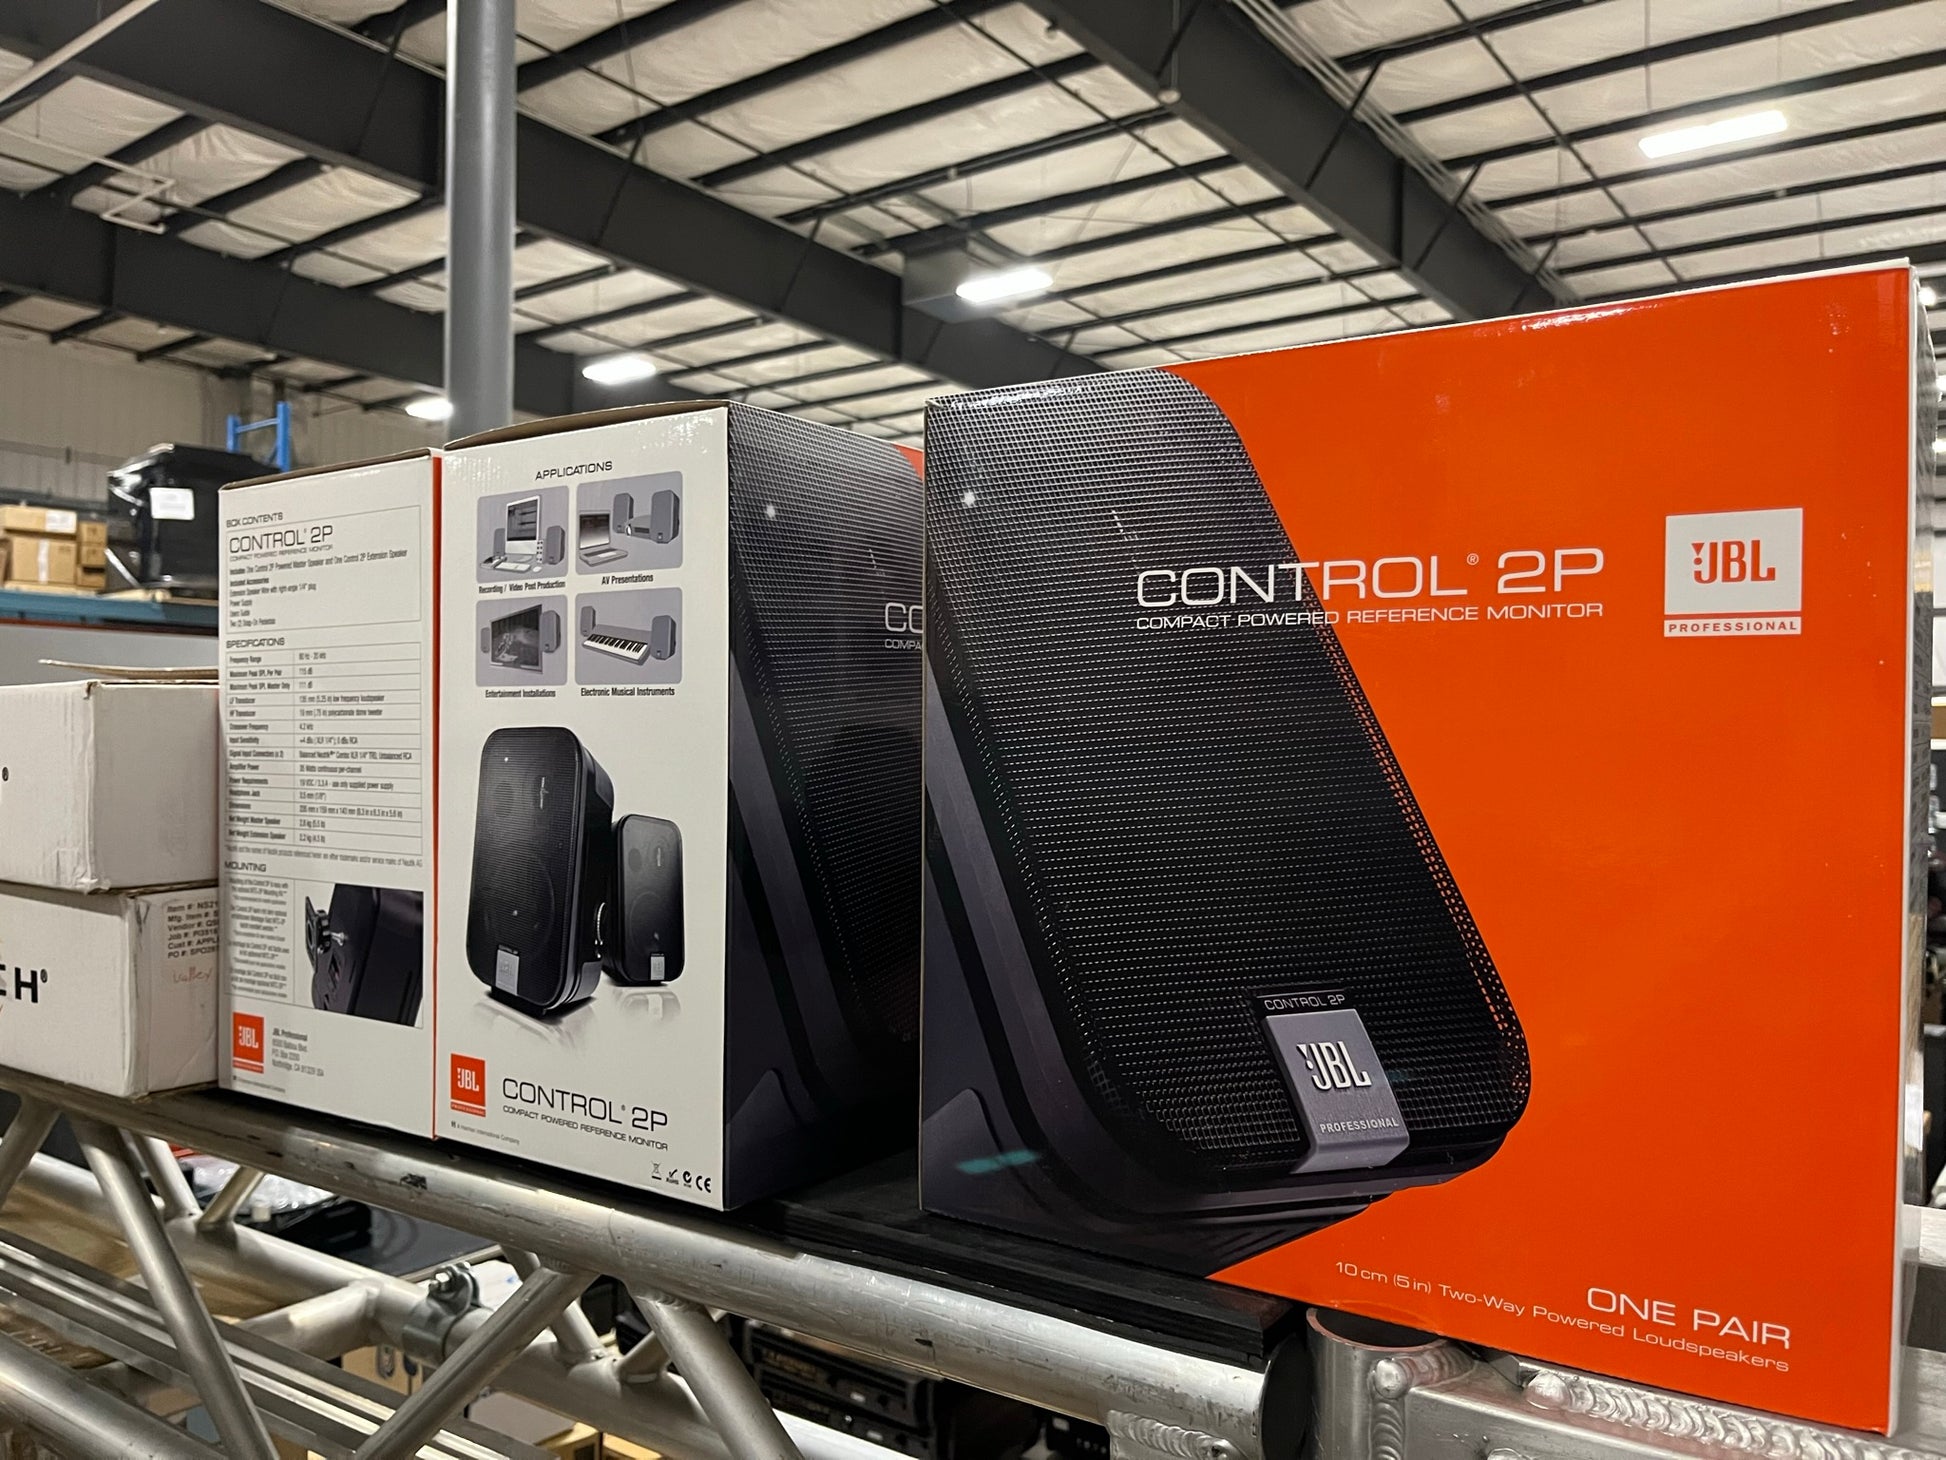 New JBL Control 2P Compact Powered Reference Monitors, New In Box for Sale. 					We Sell Professional Audio Equipment. Audio Systems, Amplifiers, Consoles, Mixers, Electronics, Entertainment, Sound, Live.